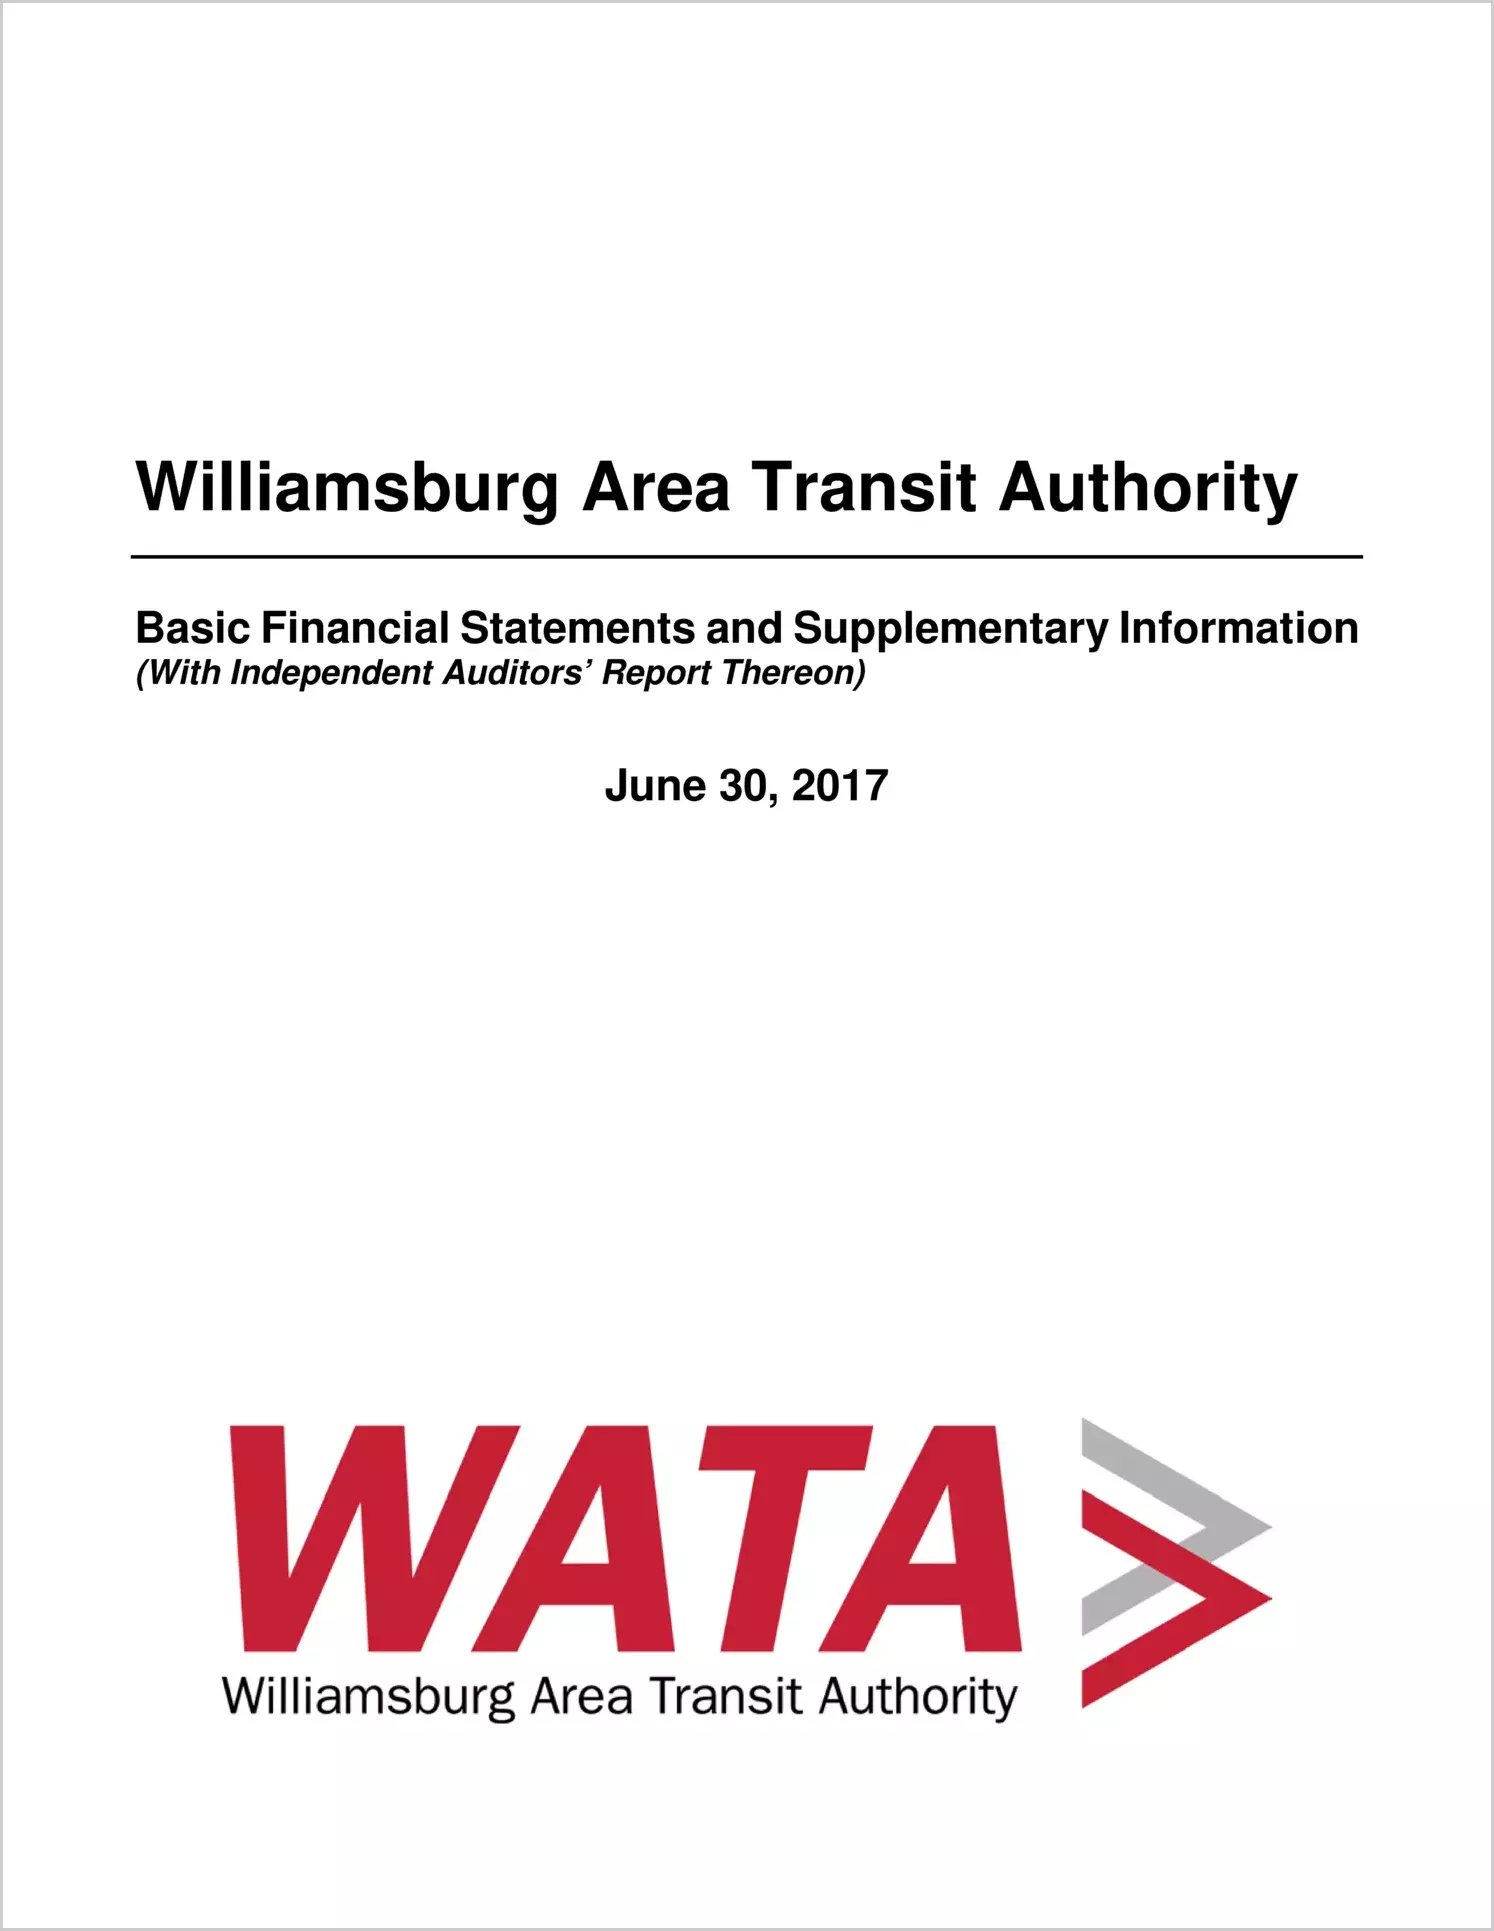 2017 ABC/Other Annual Financial Report  for Williamsburg Area Transit Authority